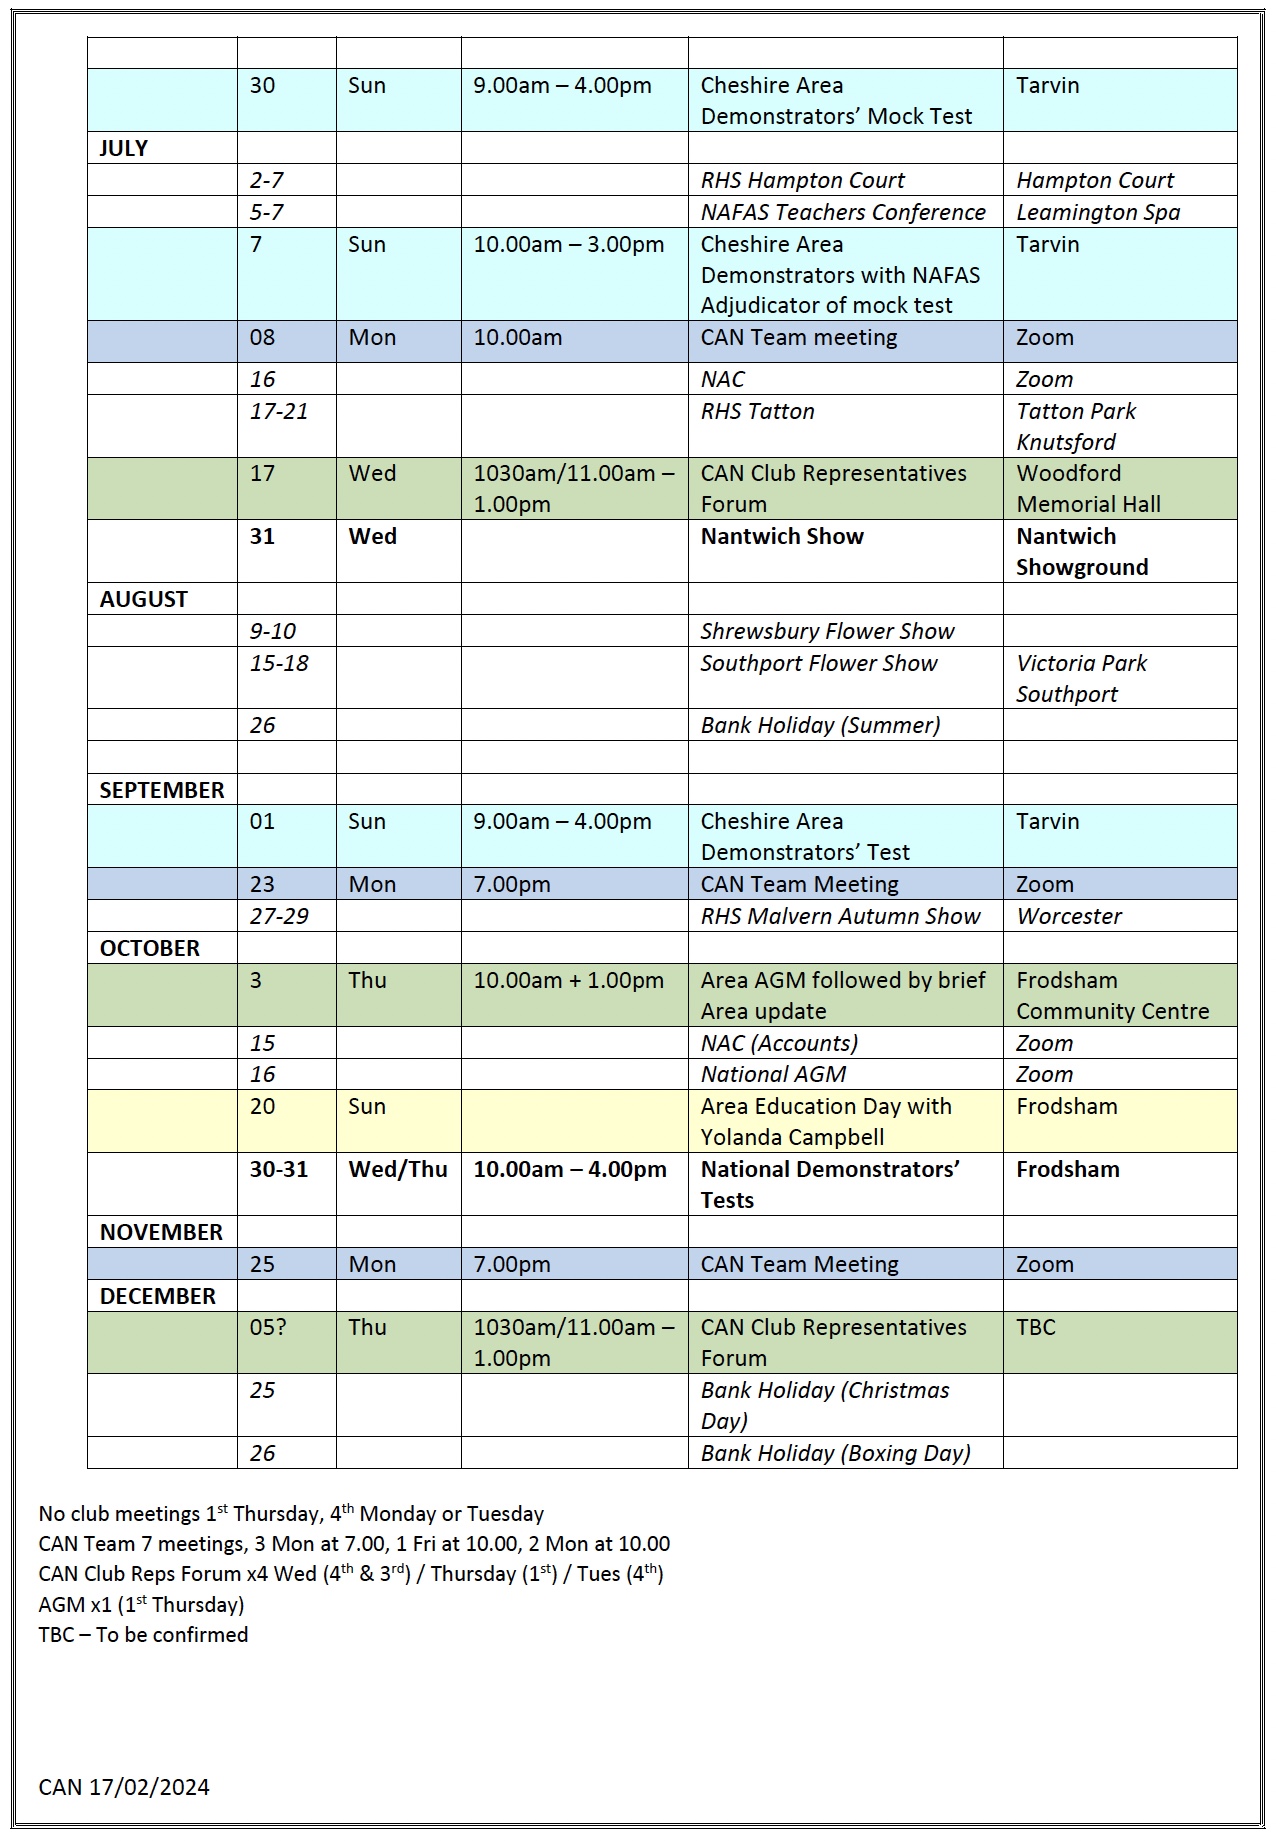 CAN Calendar of events and meetings 2024 page 2